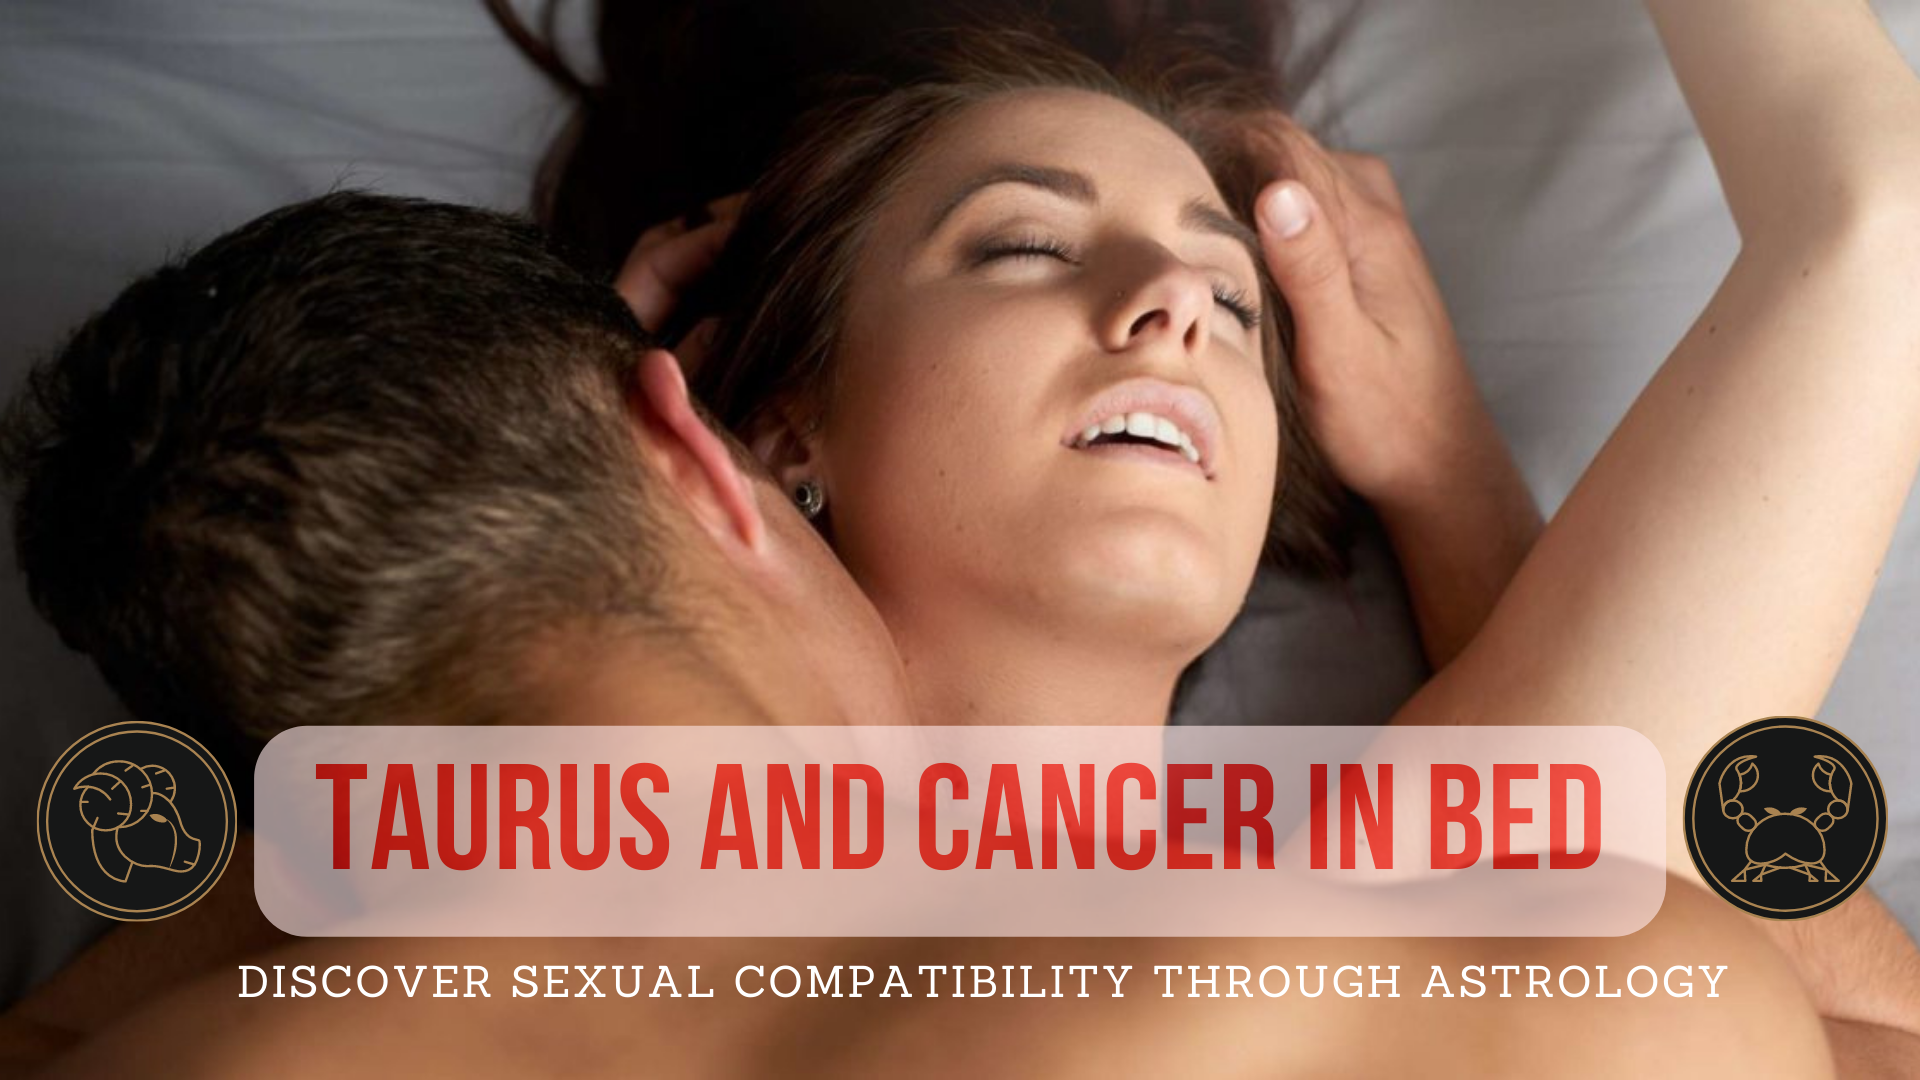 Taurus And Cancer In Bed - Discover Sexual Compatibility Through Astrology